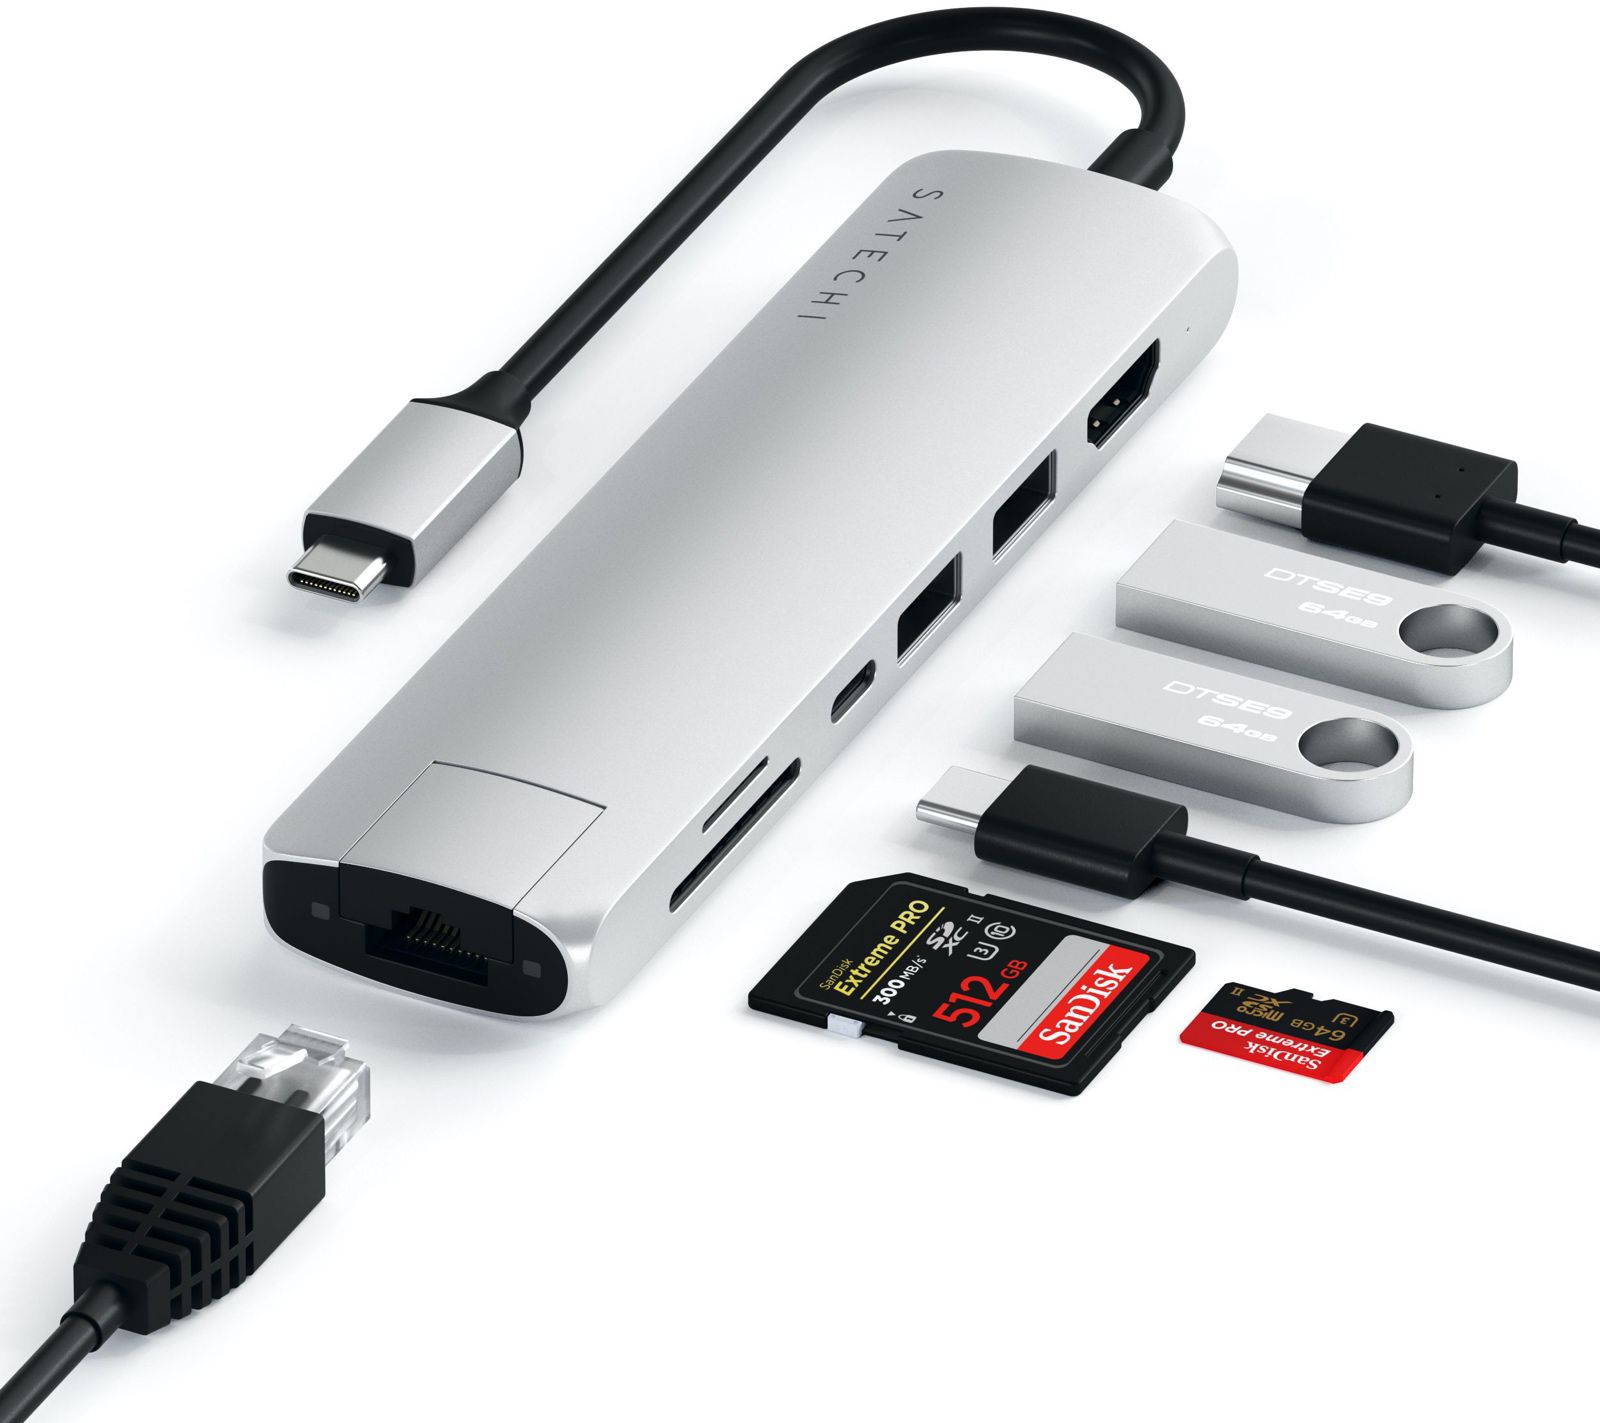 USB-C Slim Multi-Port with Ethernet Adapter - Satechi